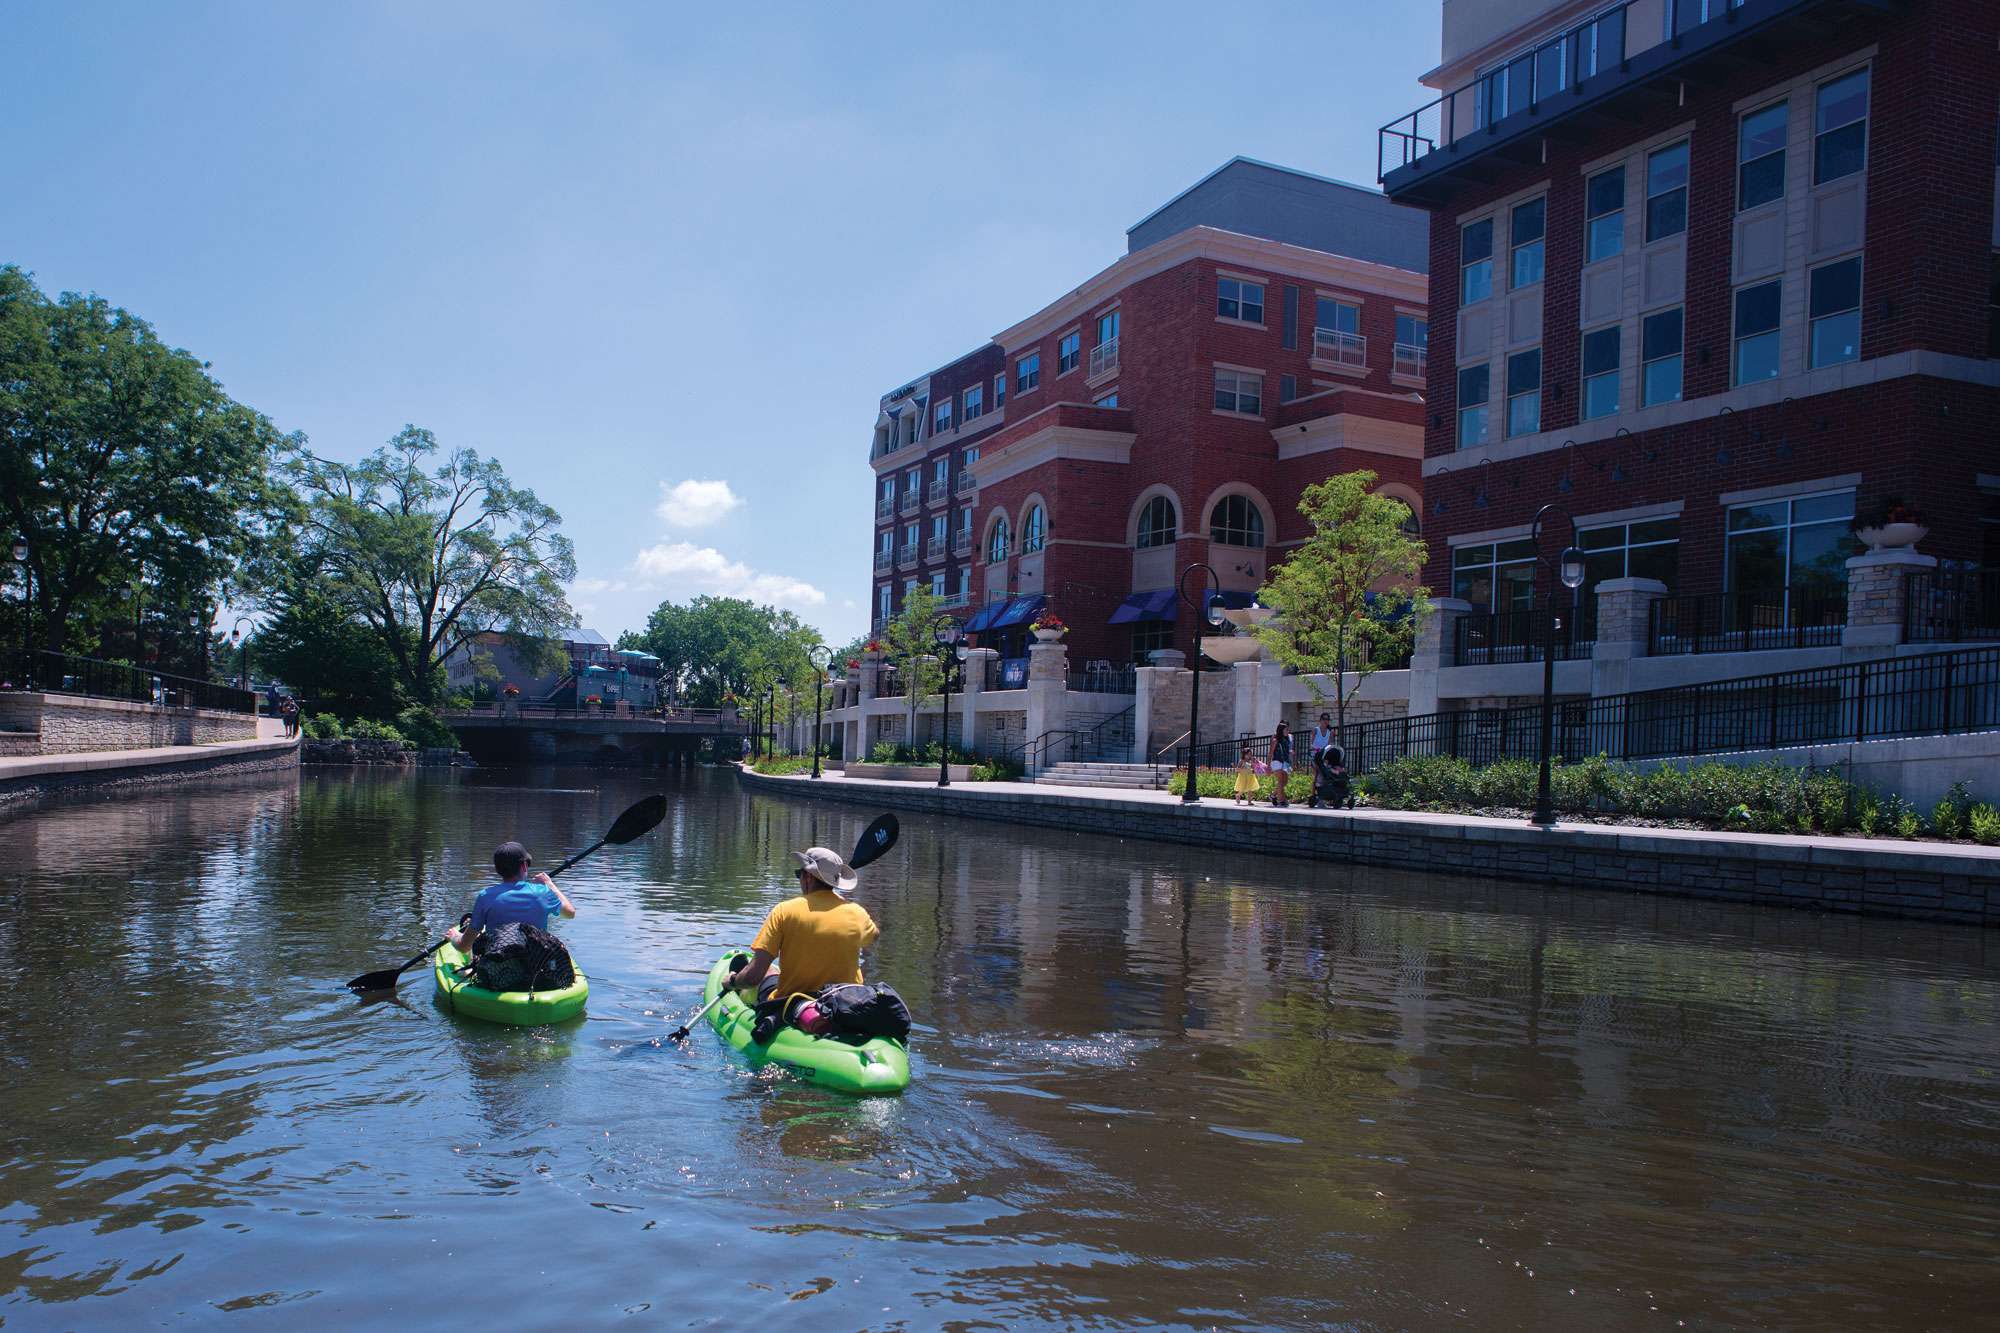 Kayaks on the river in DuPage County